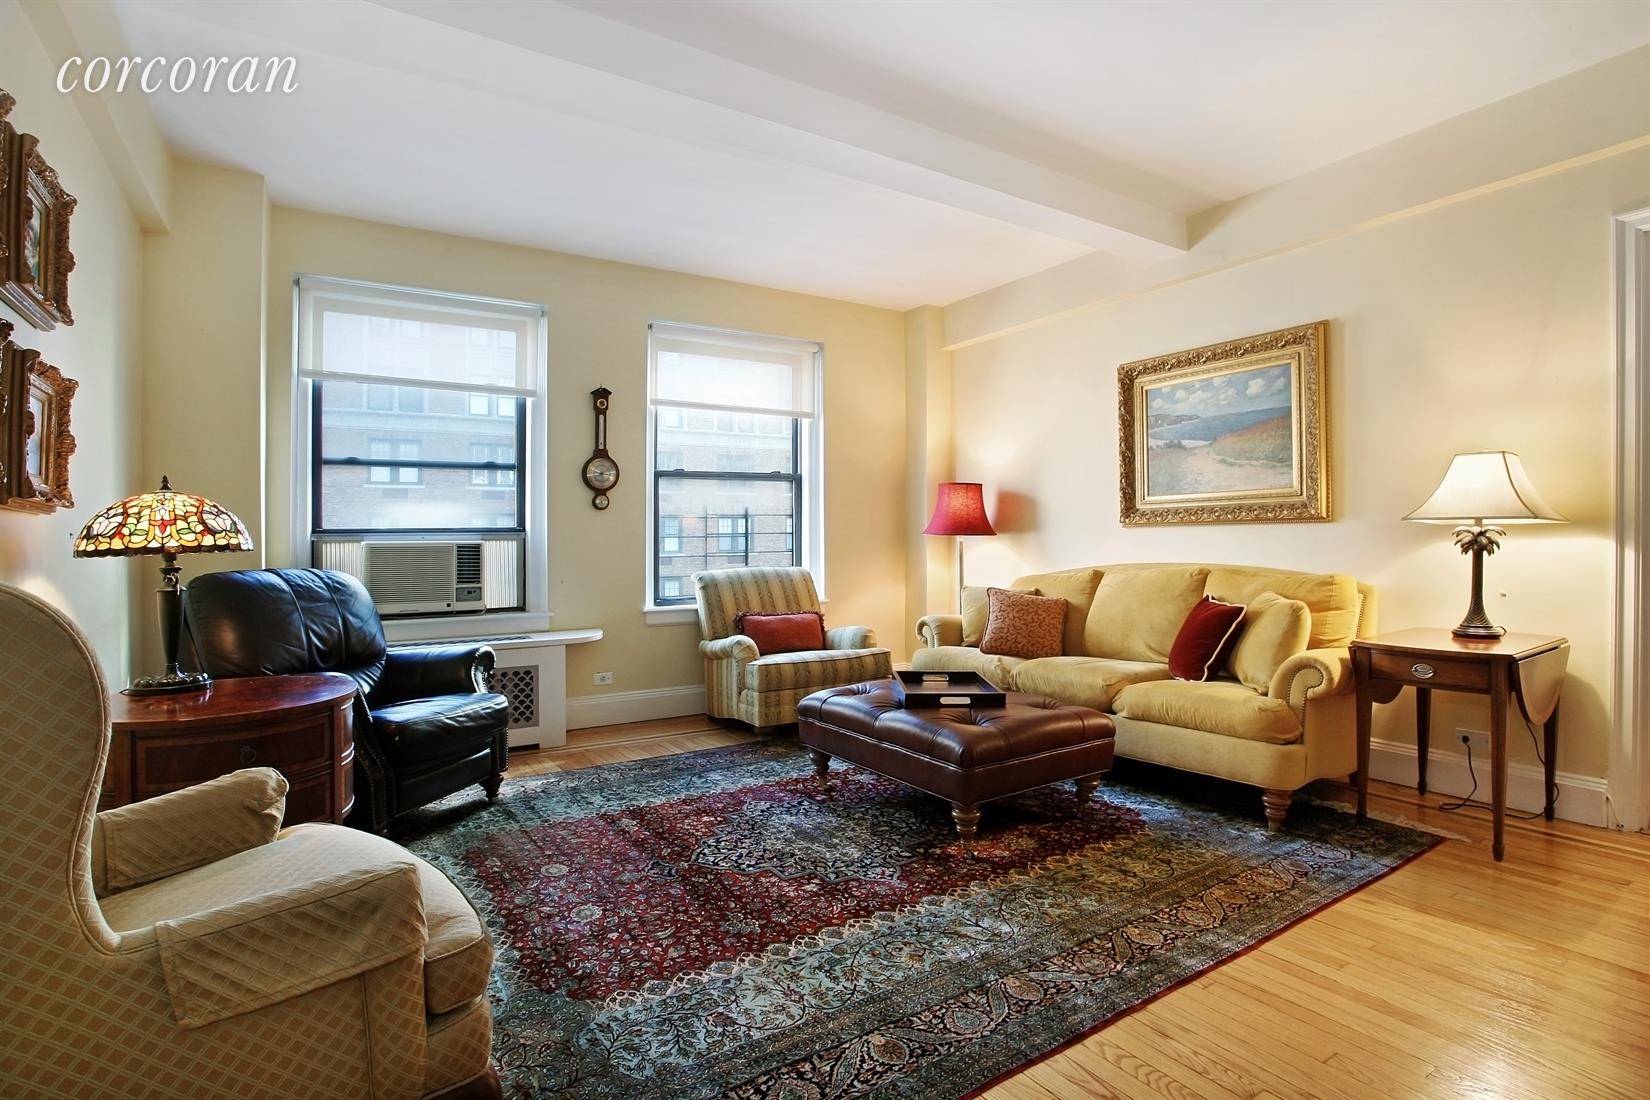 Gracious 11th floor 4. 5 room home located at The Bancroft at 40 West 72nd Street next to Central Park in prime Upper West Side neighborhood.